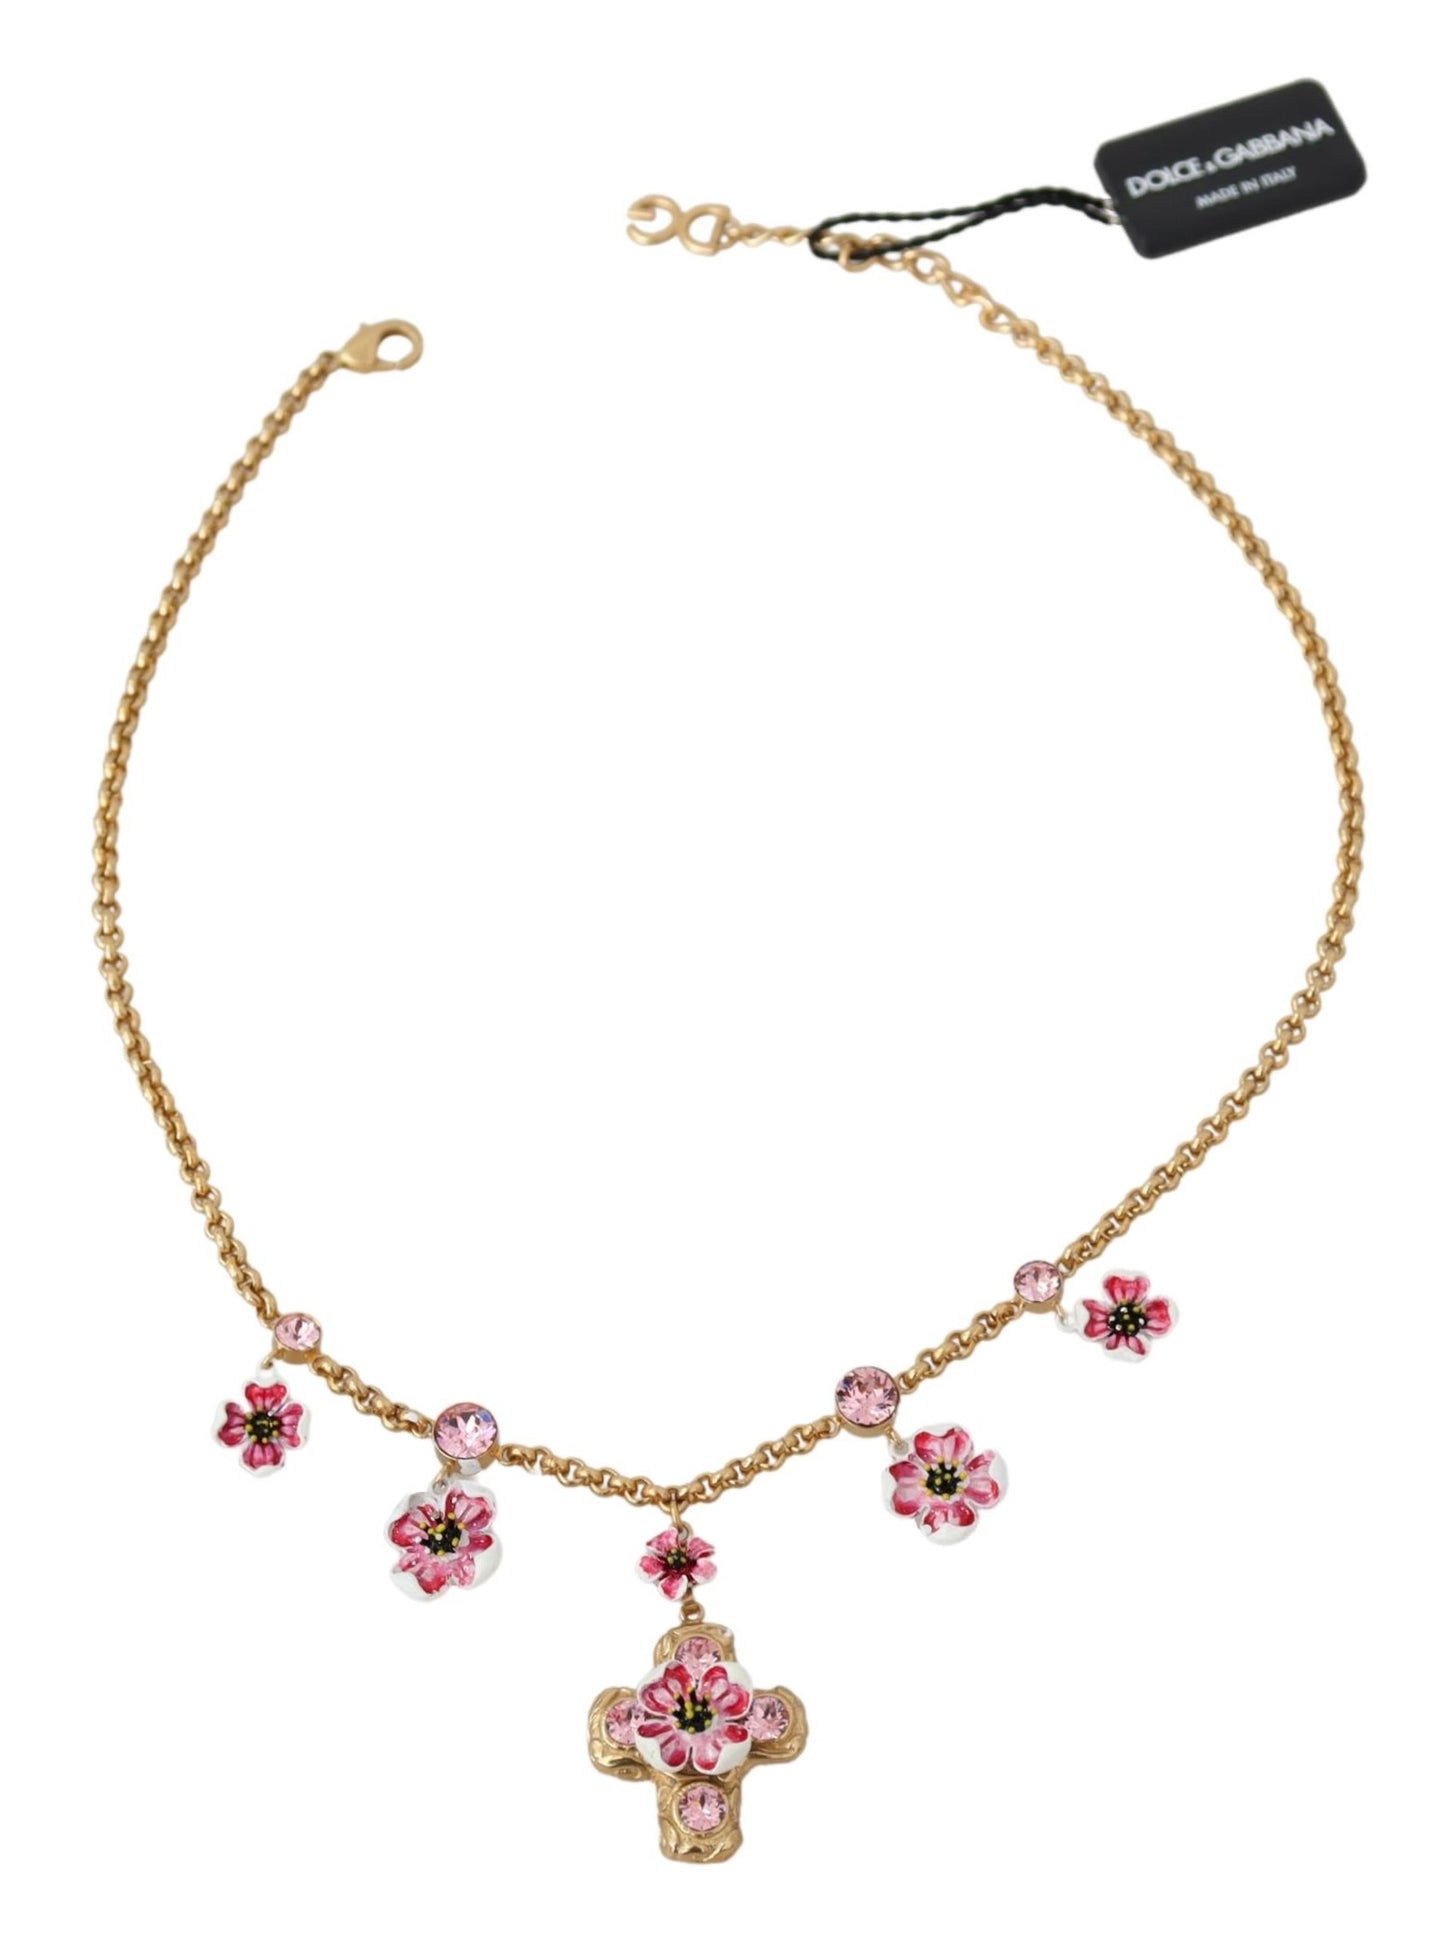 Pink Crystals Gold Chain Cross Floral Charm Necklace